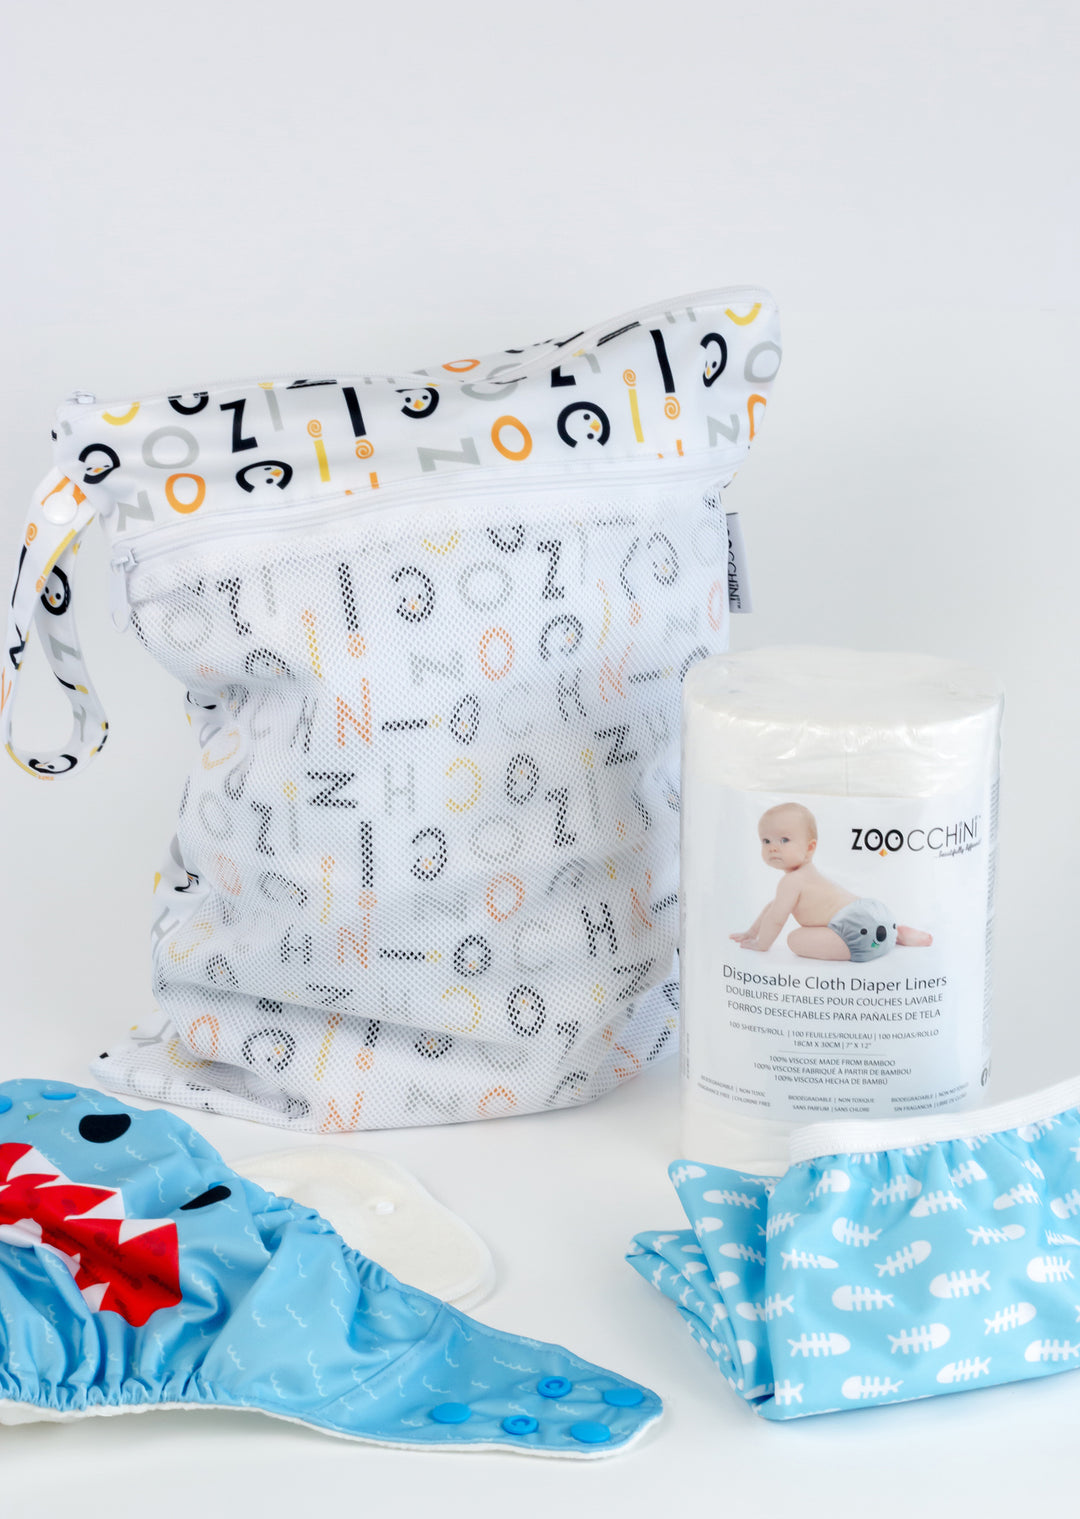 ZOOCCHINI - Disposable Cloth Diaper Liners